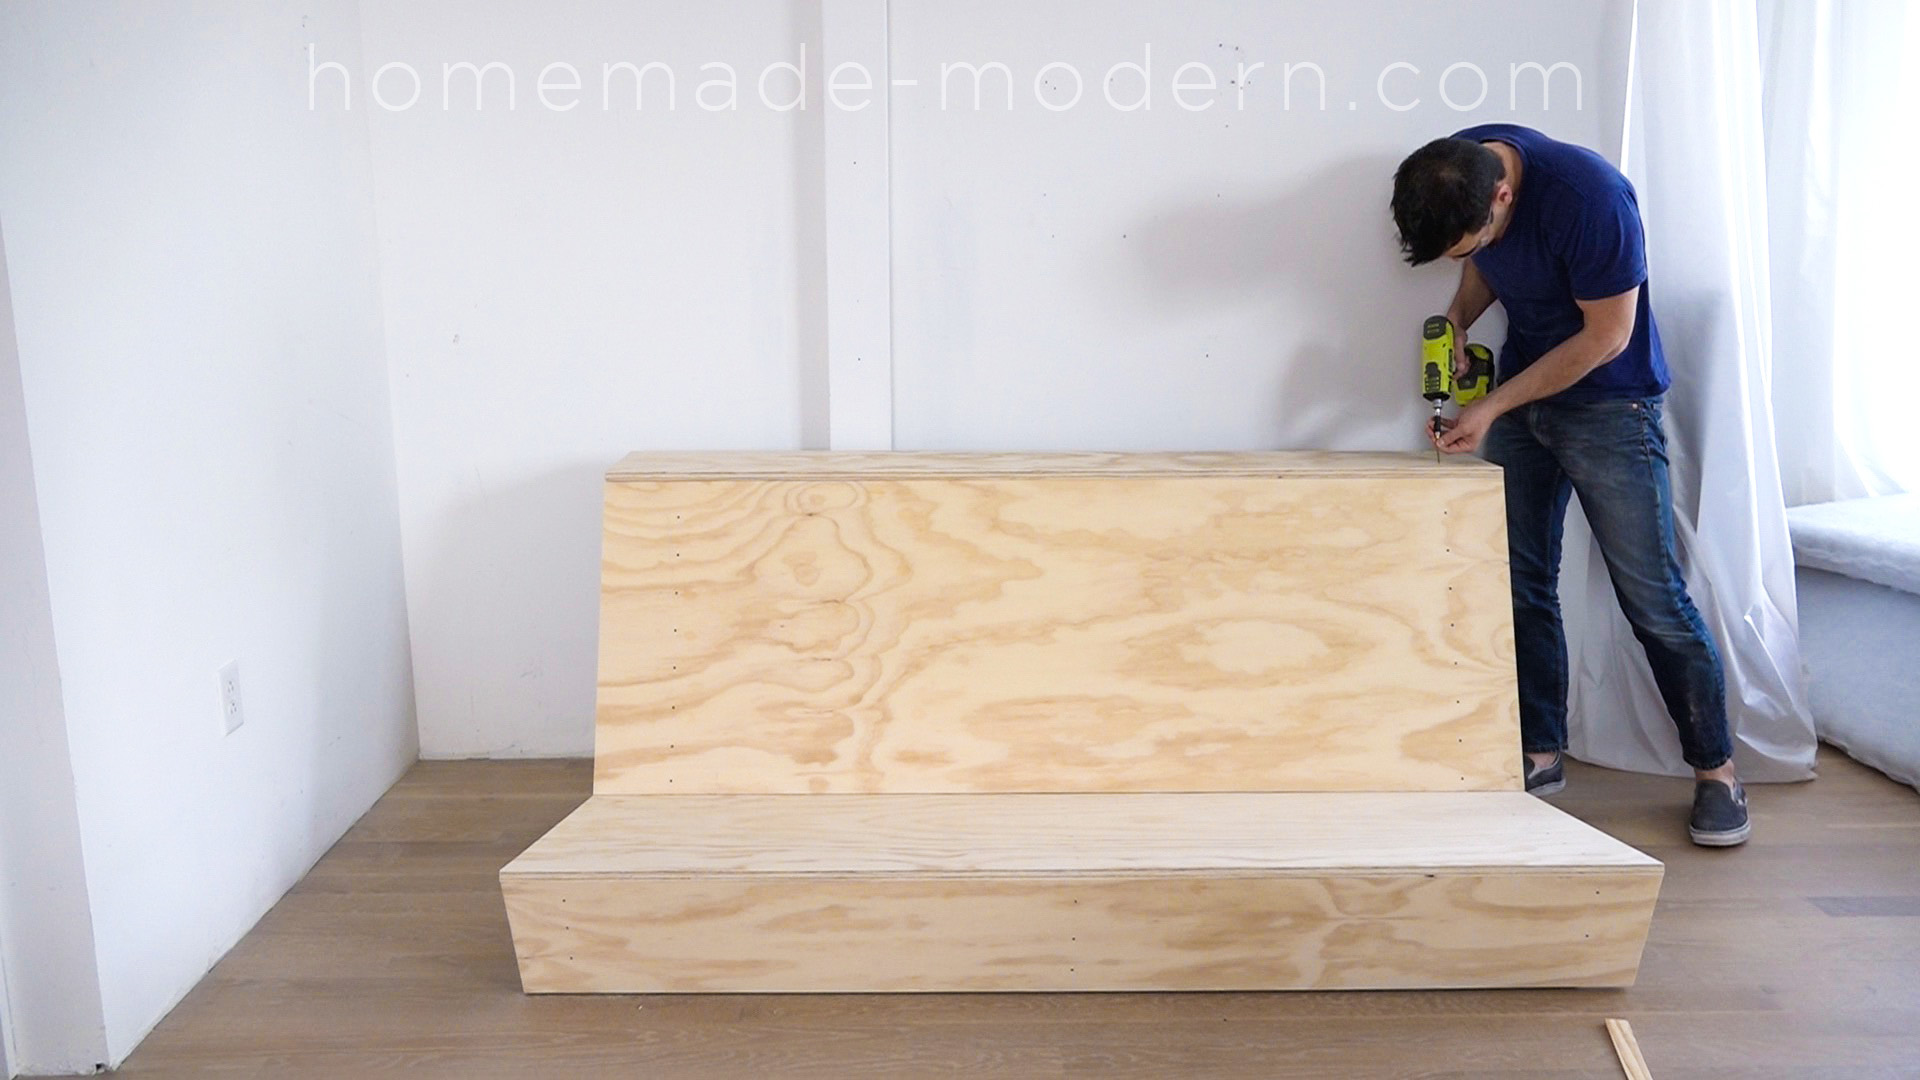 This DIY Zig Zag Sofa was designed specifically for lofts and has a built-in counter along the back. For more information go to HomeMade-Modern.com